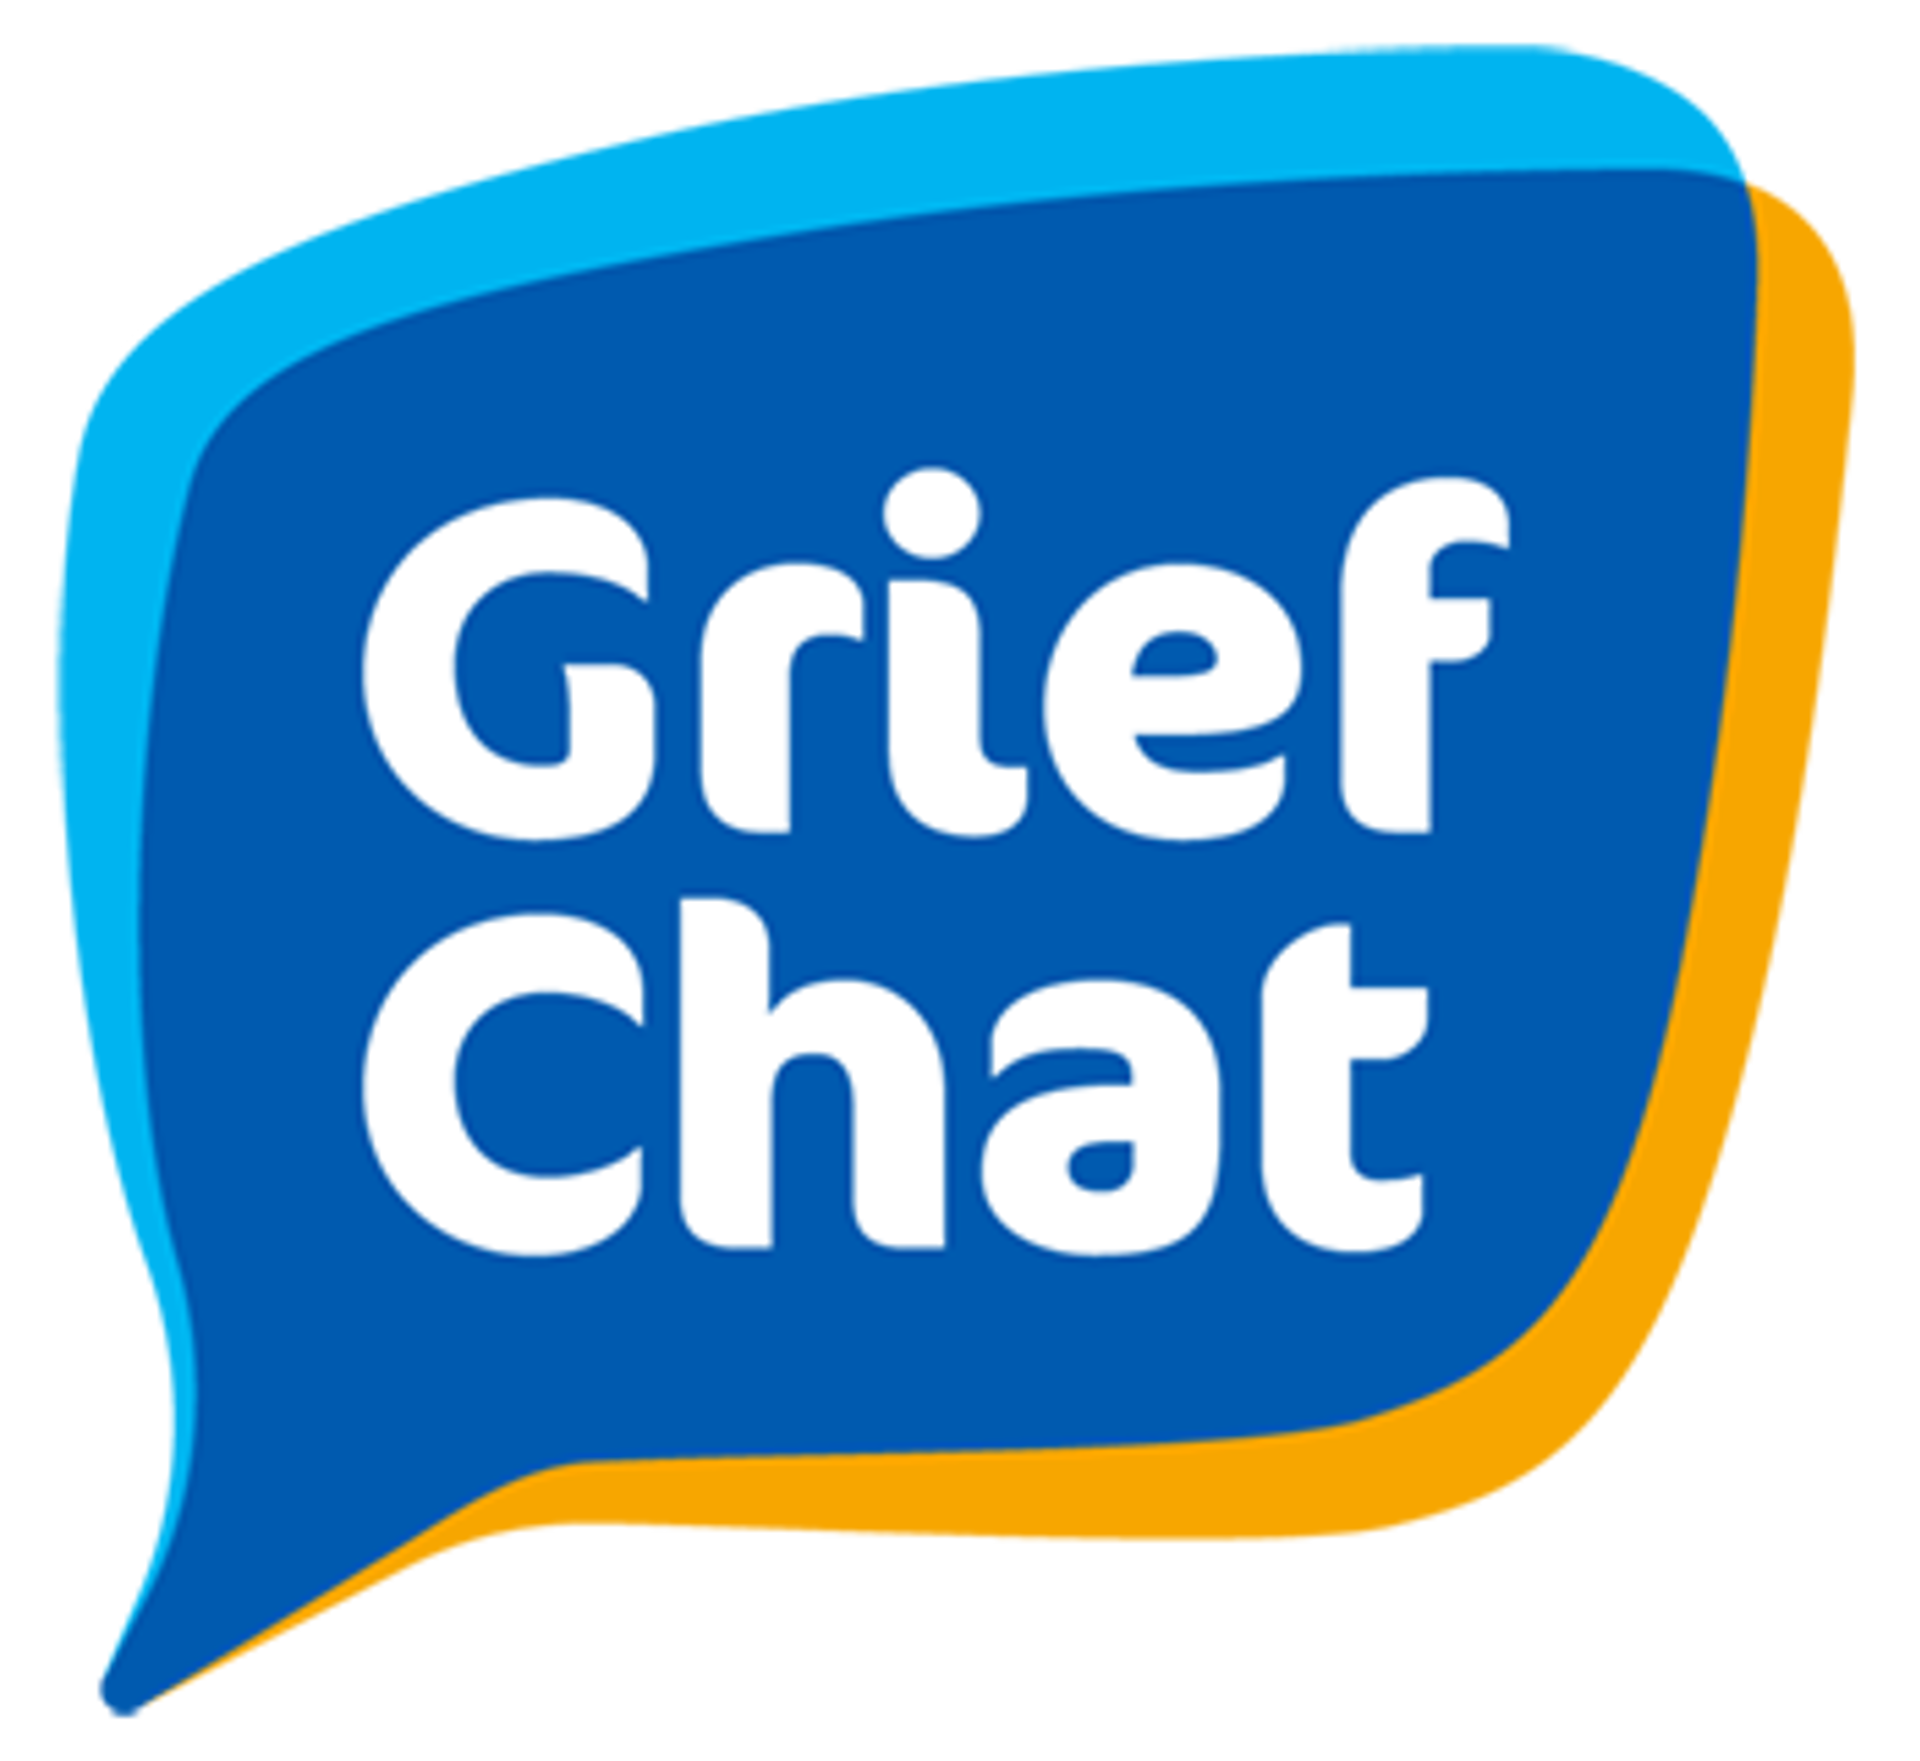 A logo for the Grief Chat service